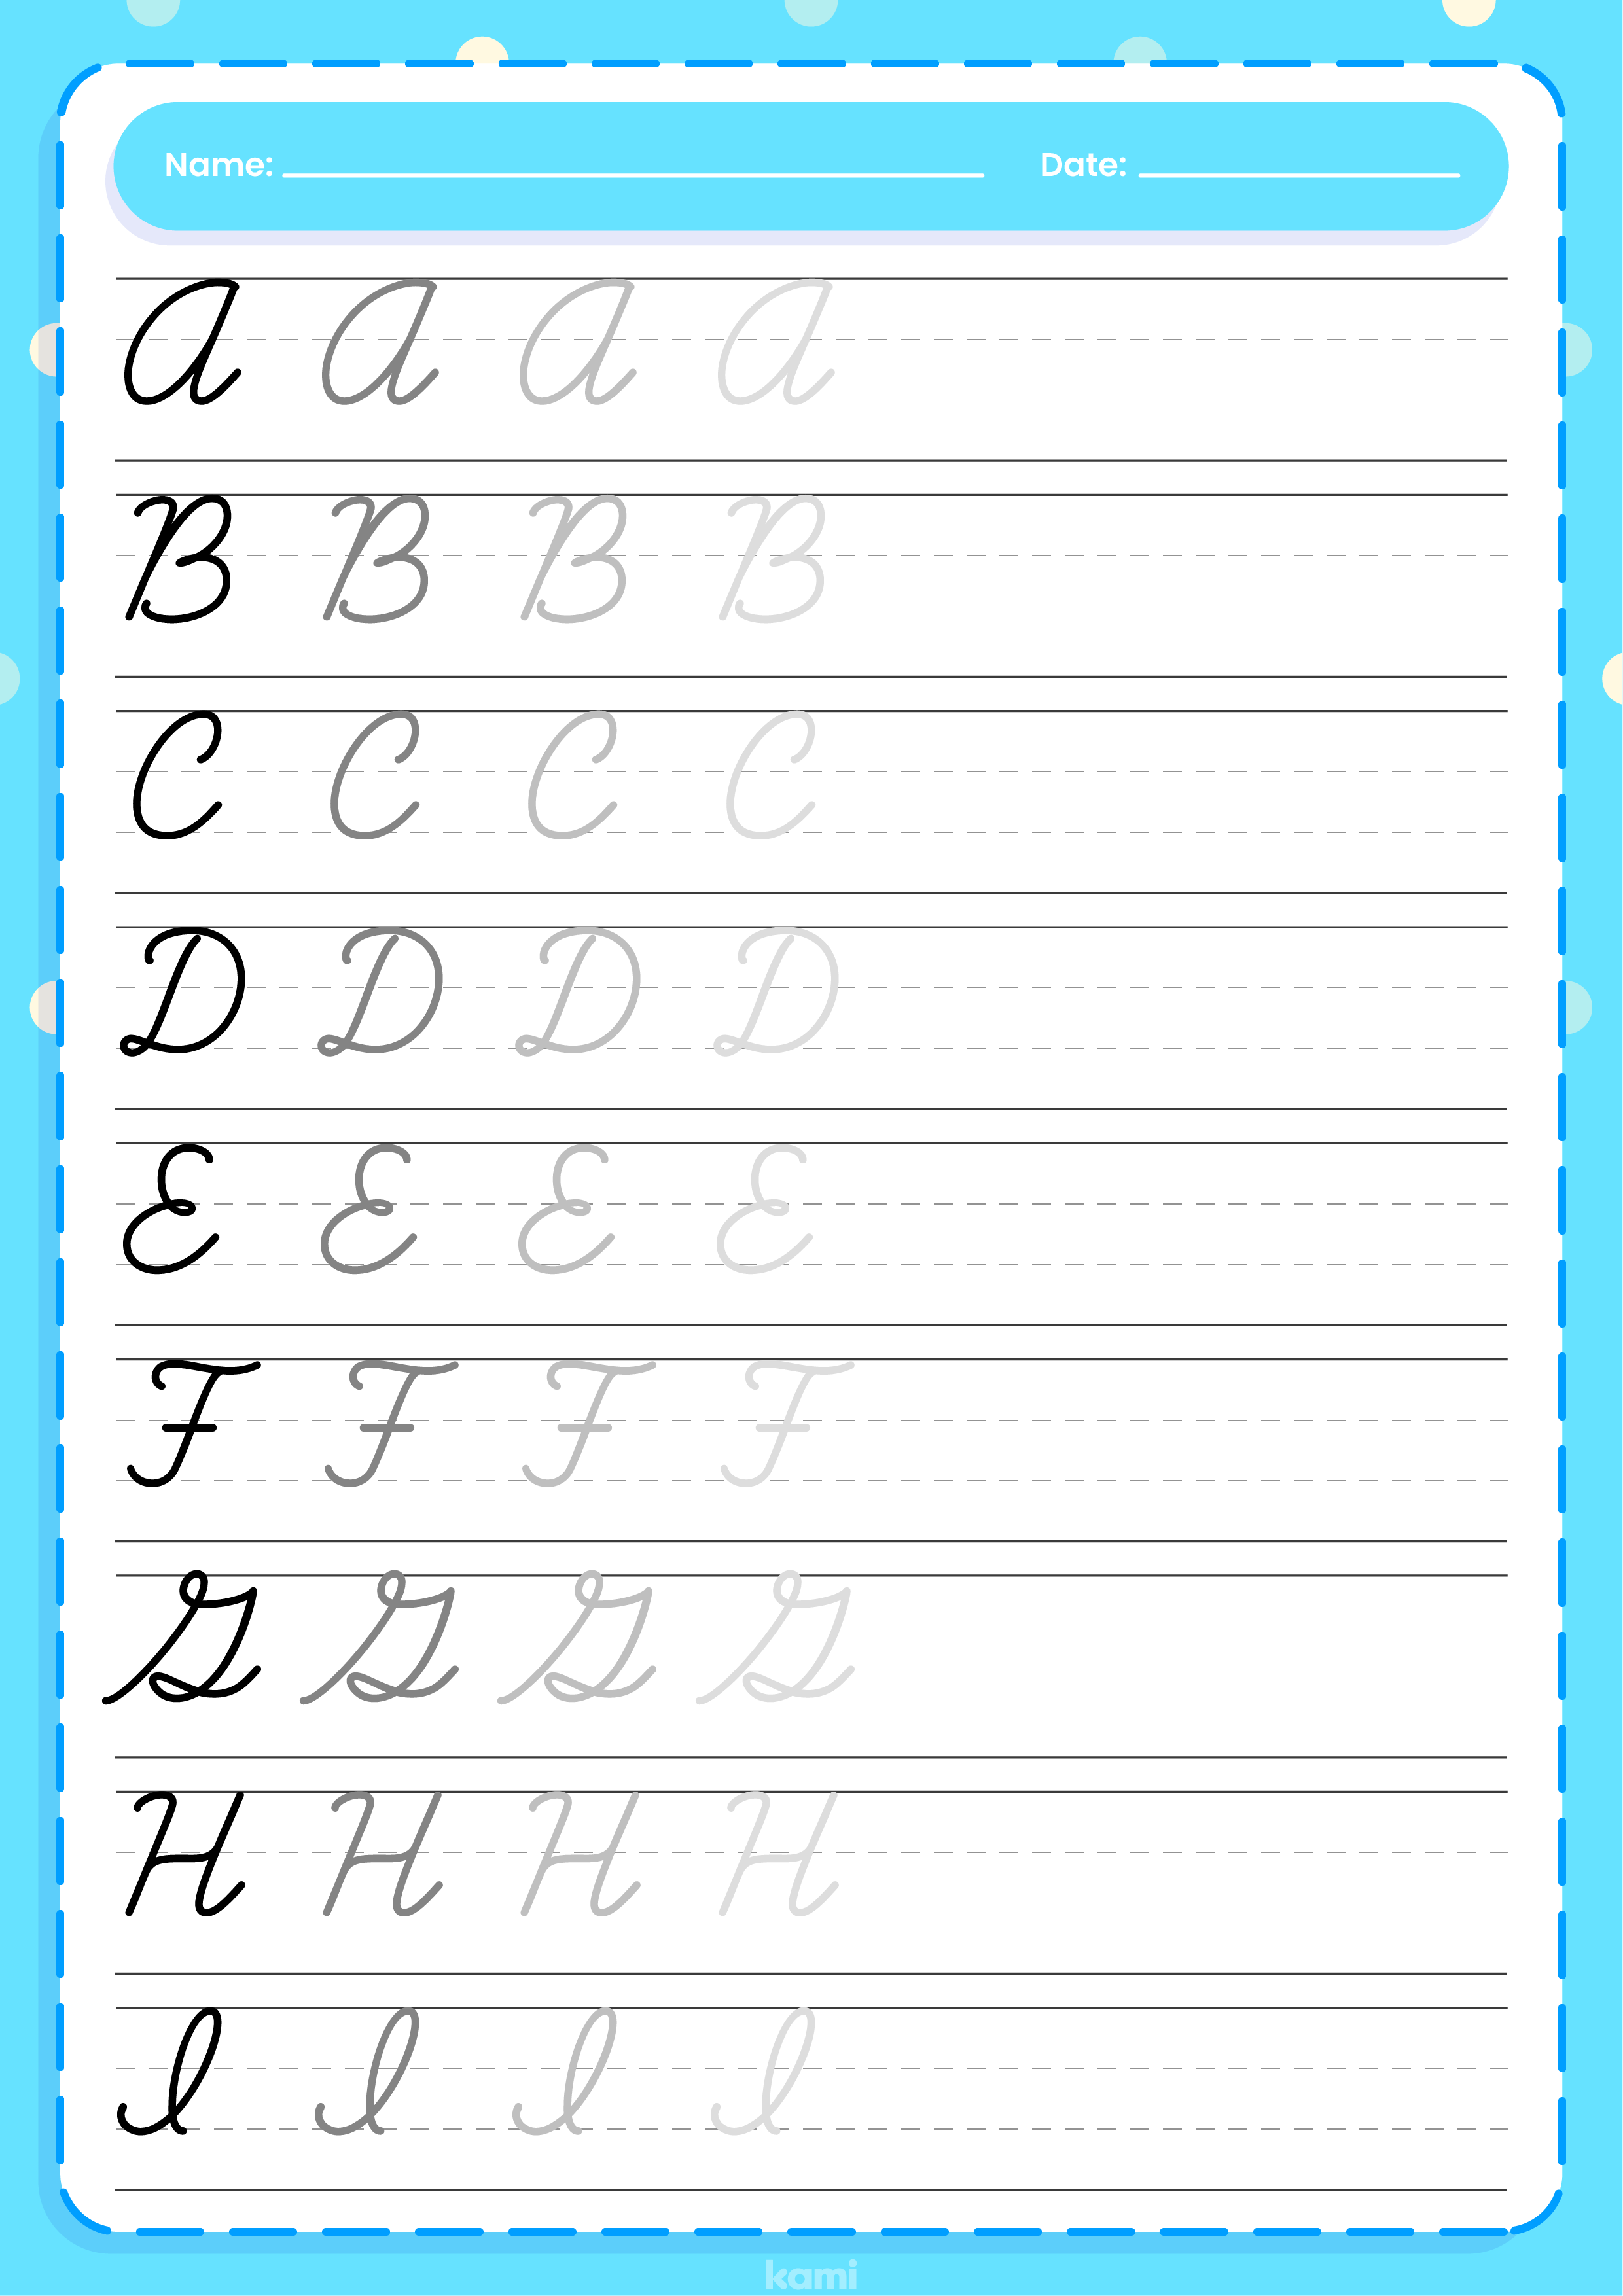 A cursive handwriting worksheet for learning penmanship with a uppercase exercise.